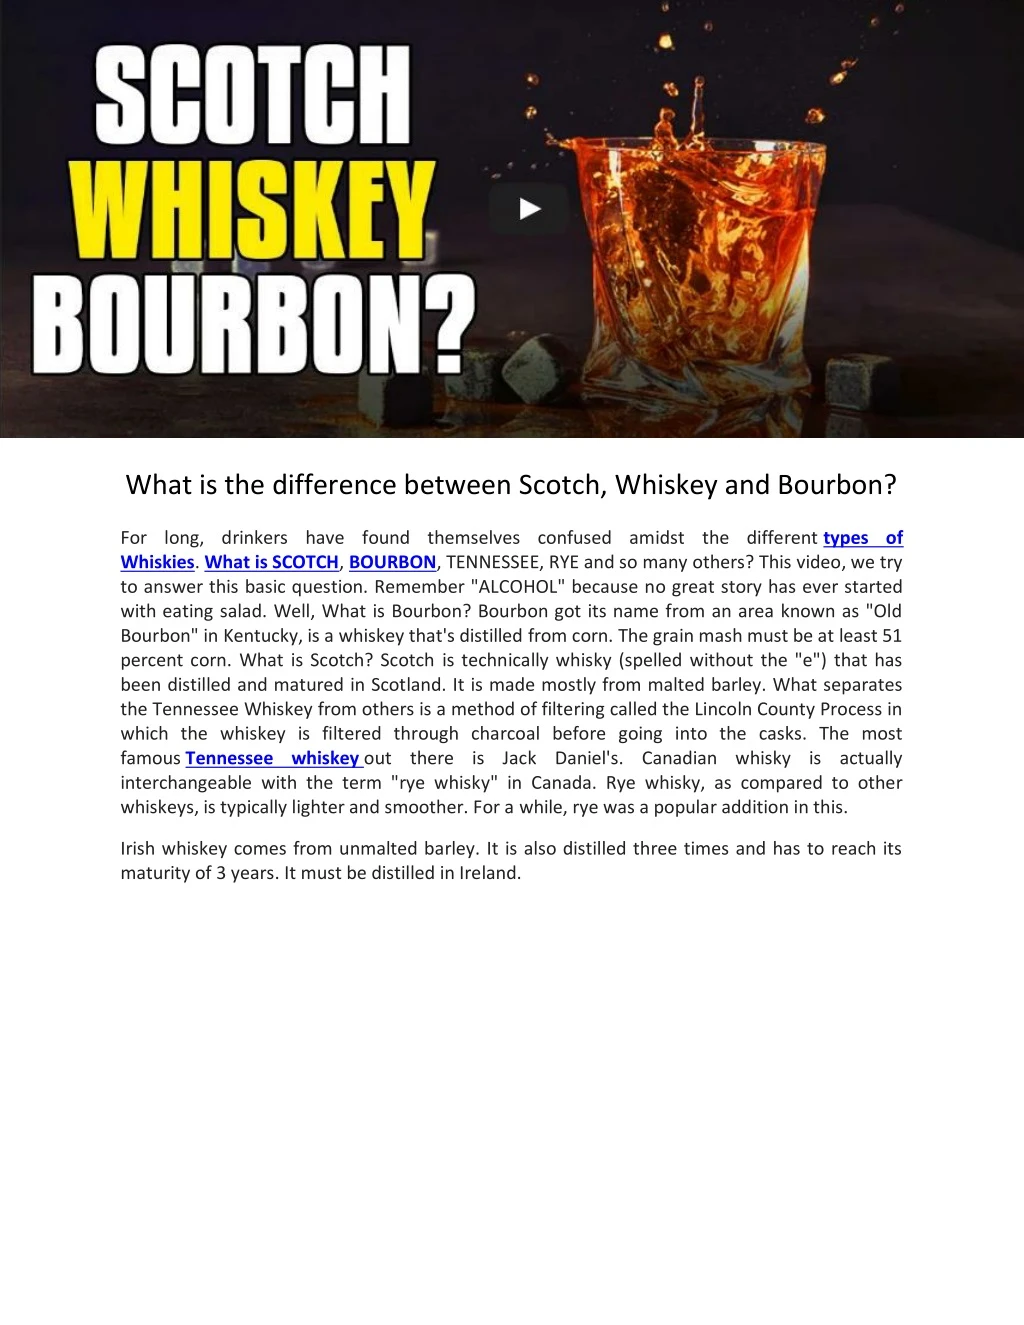 what is the difference between scotch whiskey